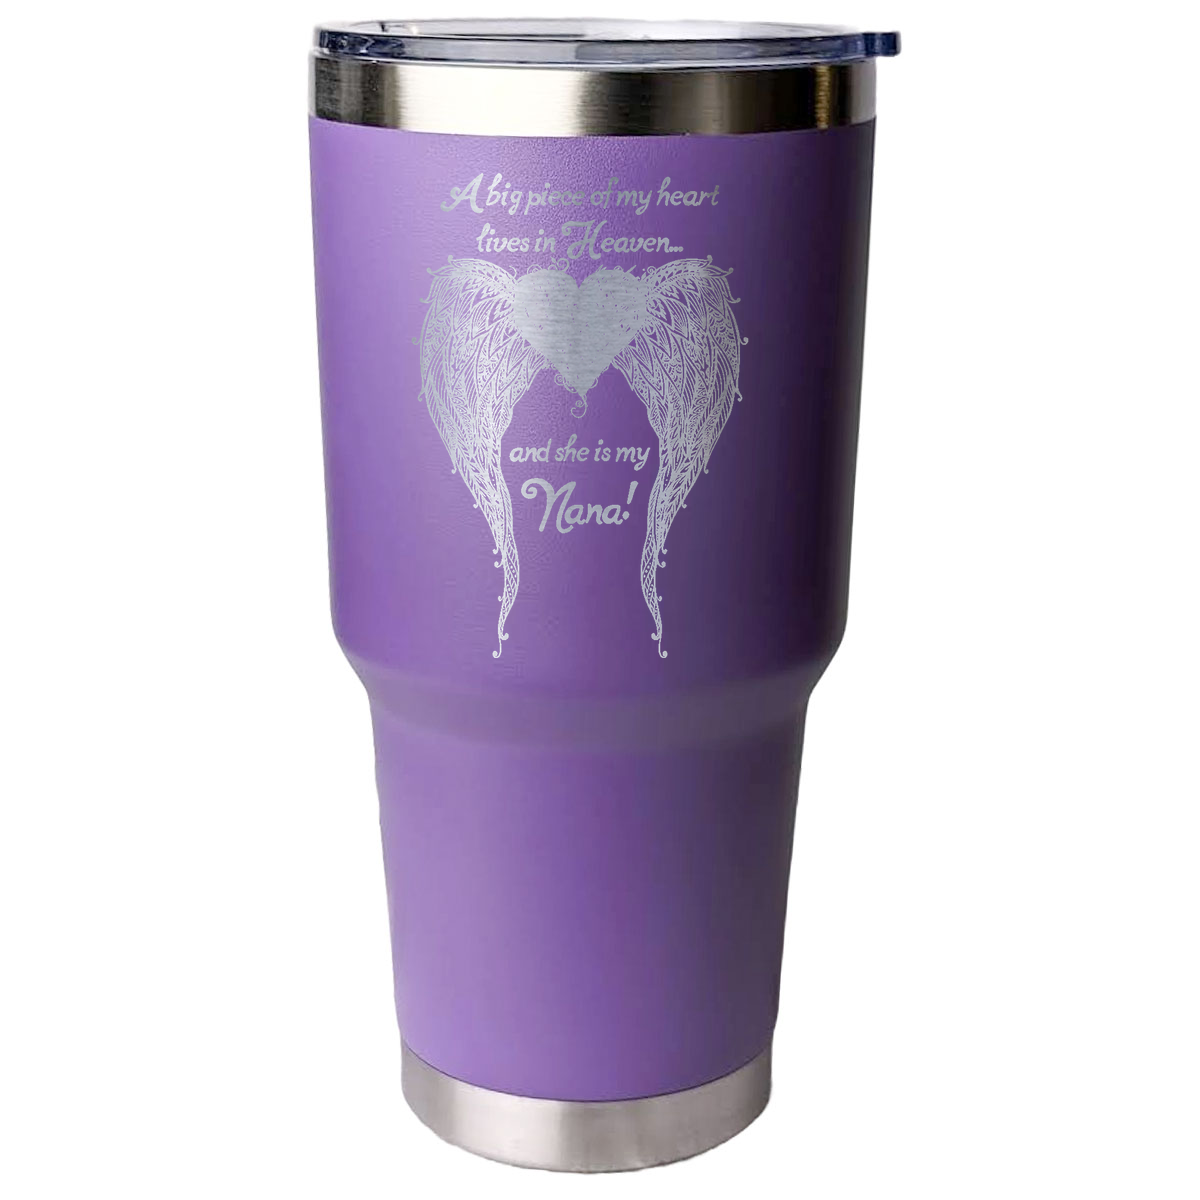 Nana - A Big Piece of my Heart 30 Ounce Laser Etched Tumbler Purple